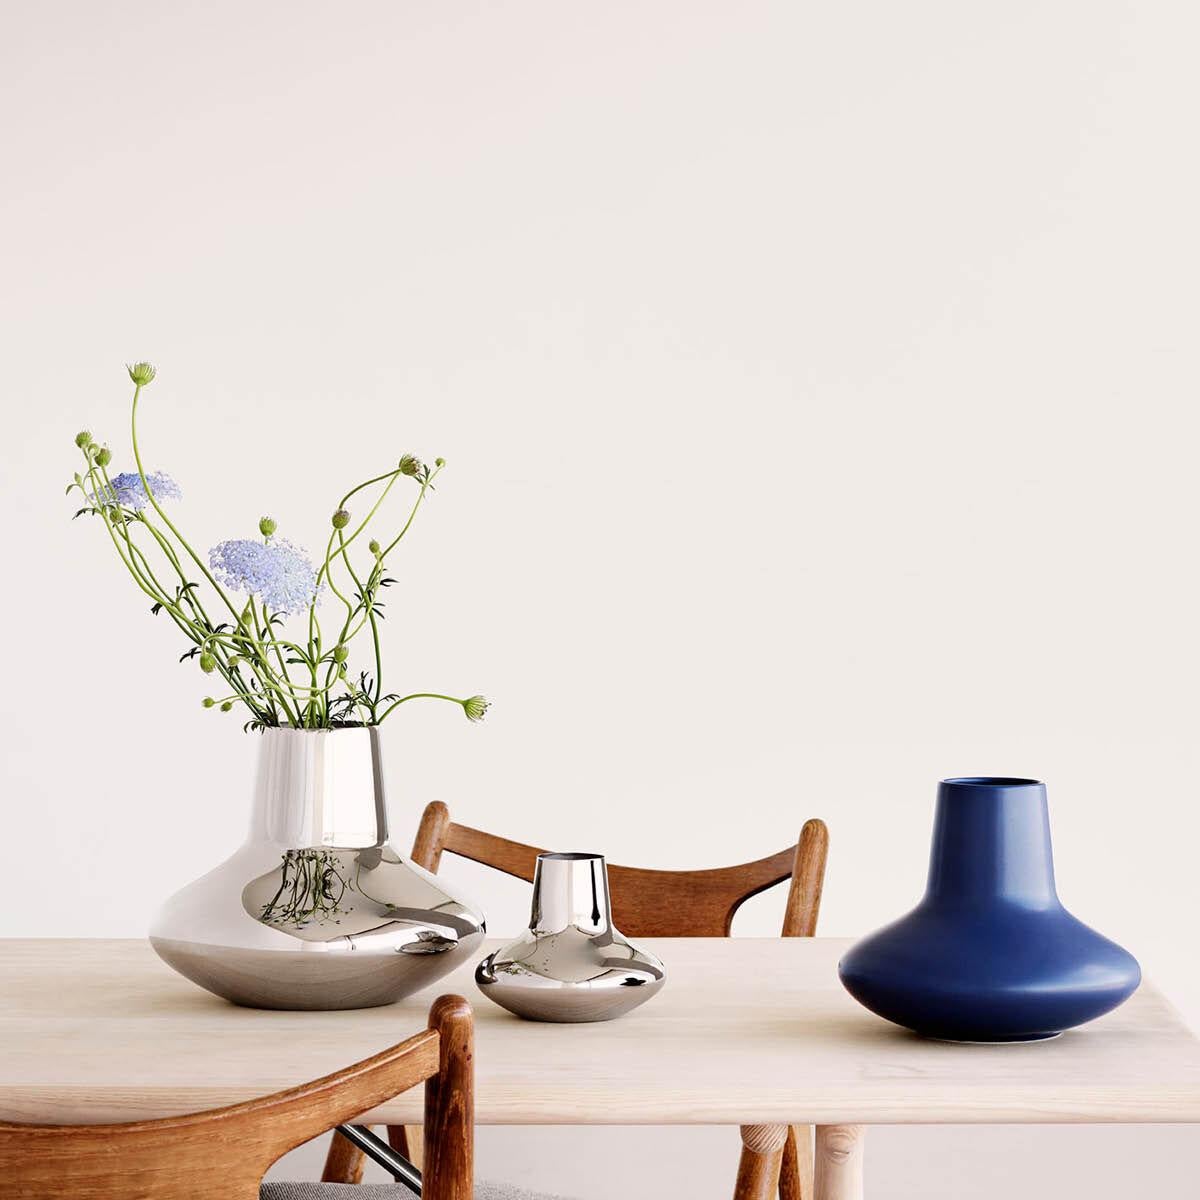 With its elegant proportions and mirror-polished surface, this medium-sized stainless steel vase is a beautiful example of minimalist Scandinavian design. Understated enough to allow the flowers within to really take centre stage, the vase